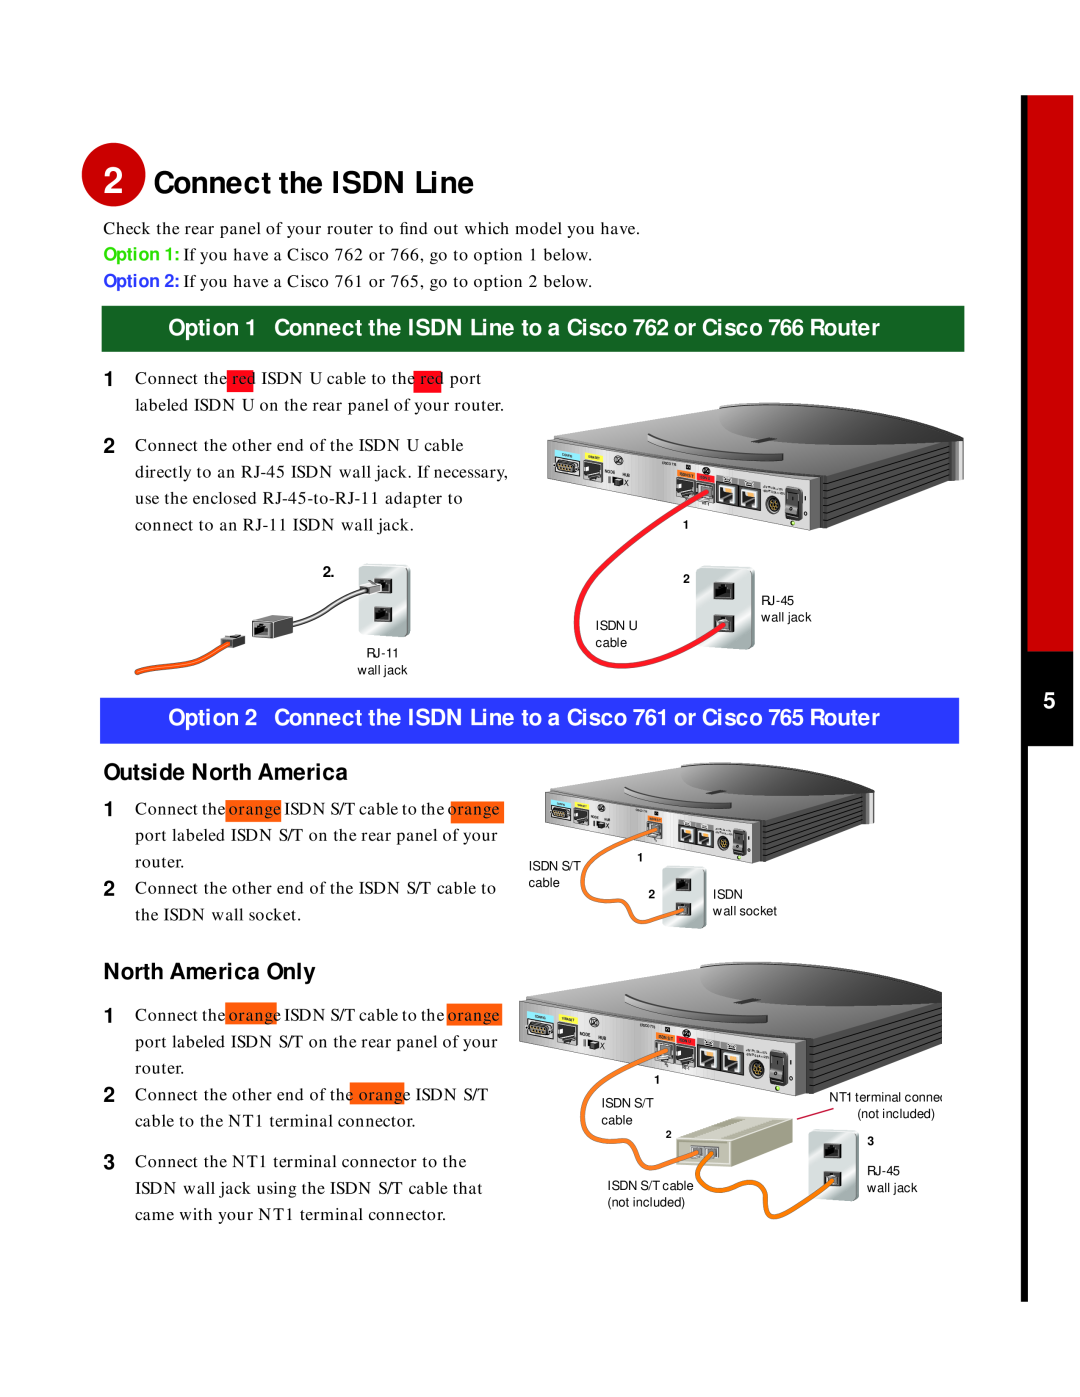 Cisco Systems 760 quick start Option 1 Connect the ISDN Line to a Cisco 762 or Cisco 766 Router, North America Only 